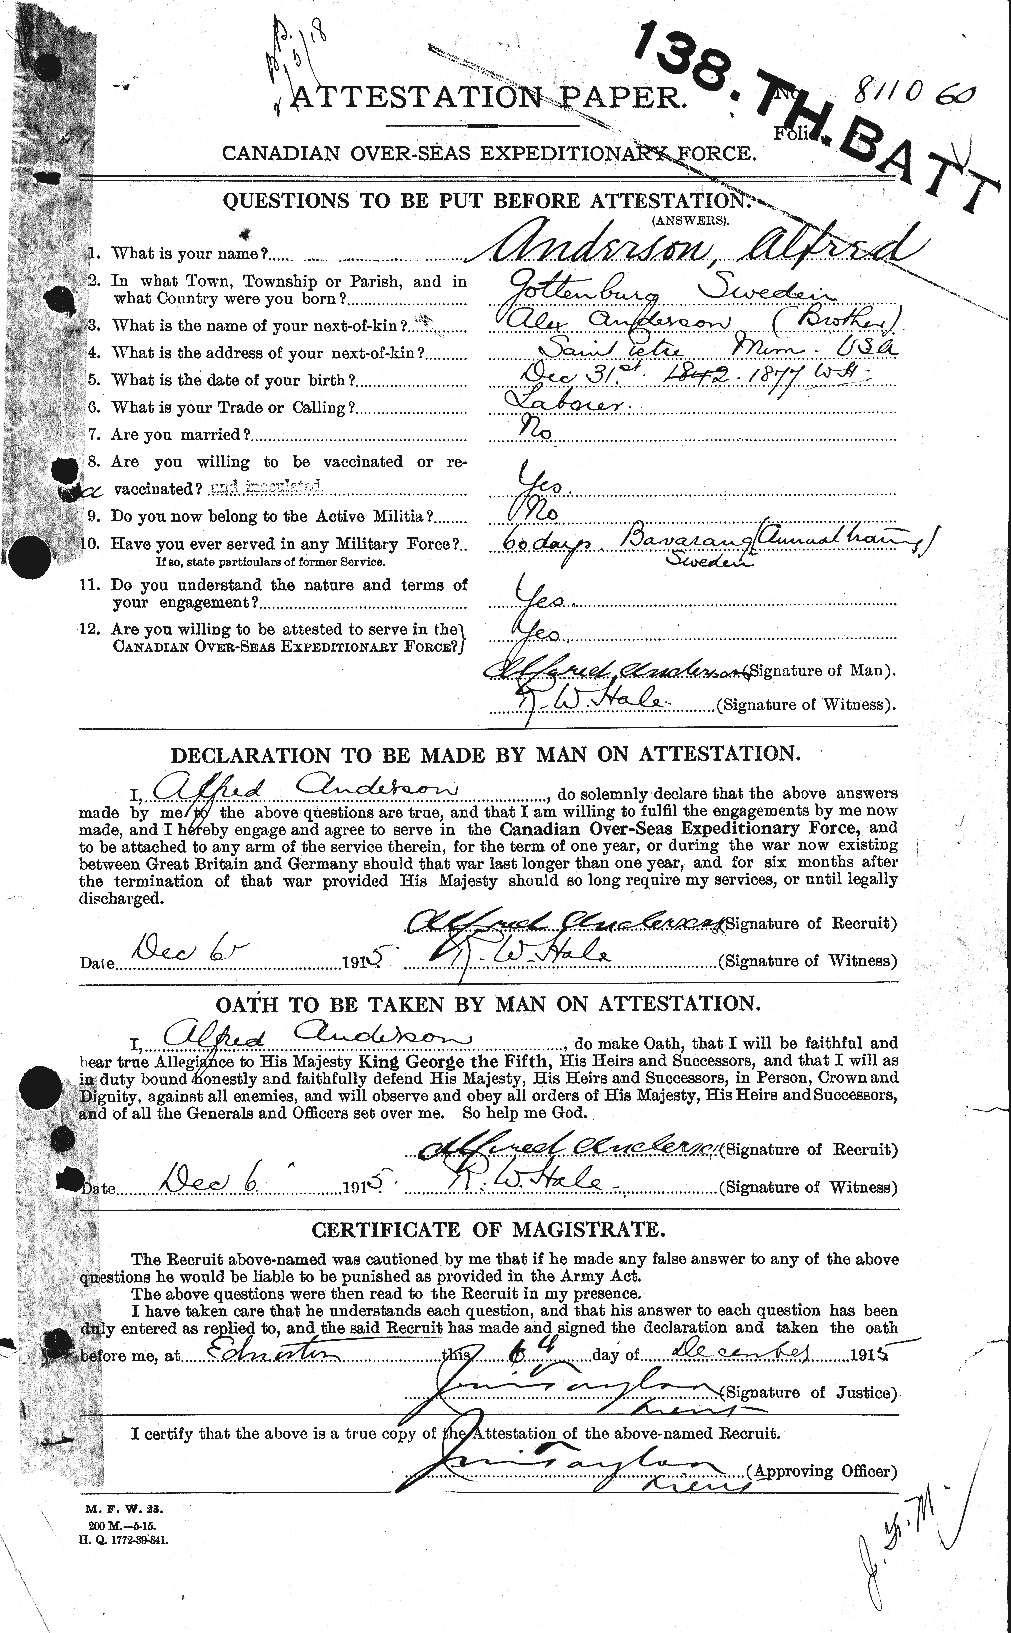 Personnel Records of the First World War - CEF 209464a